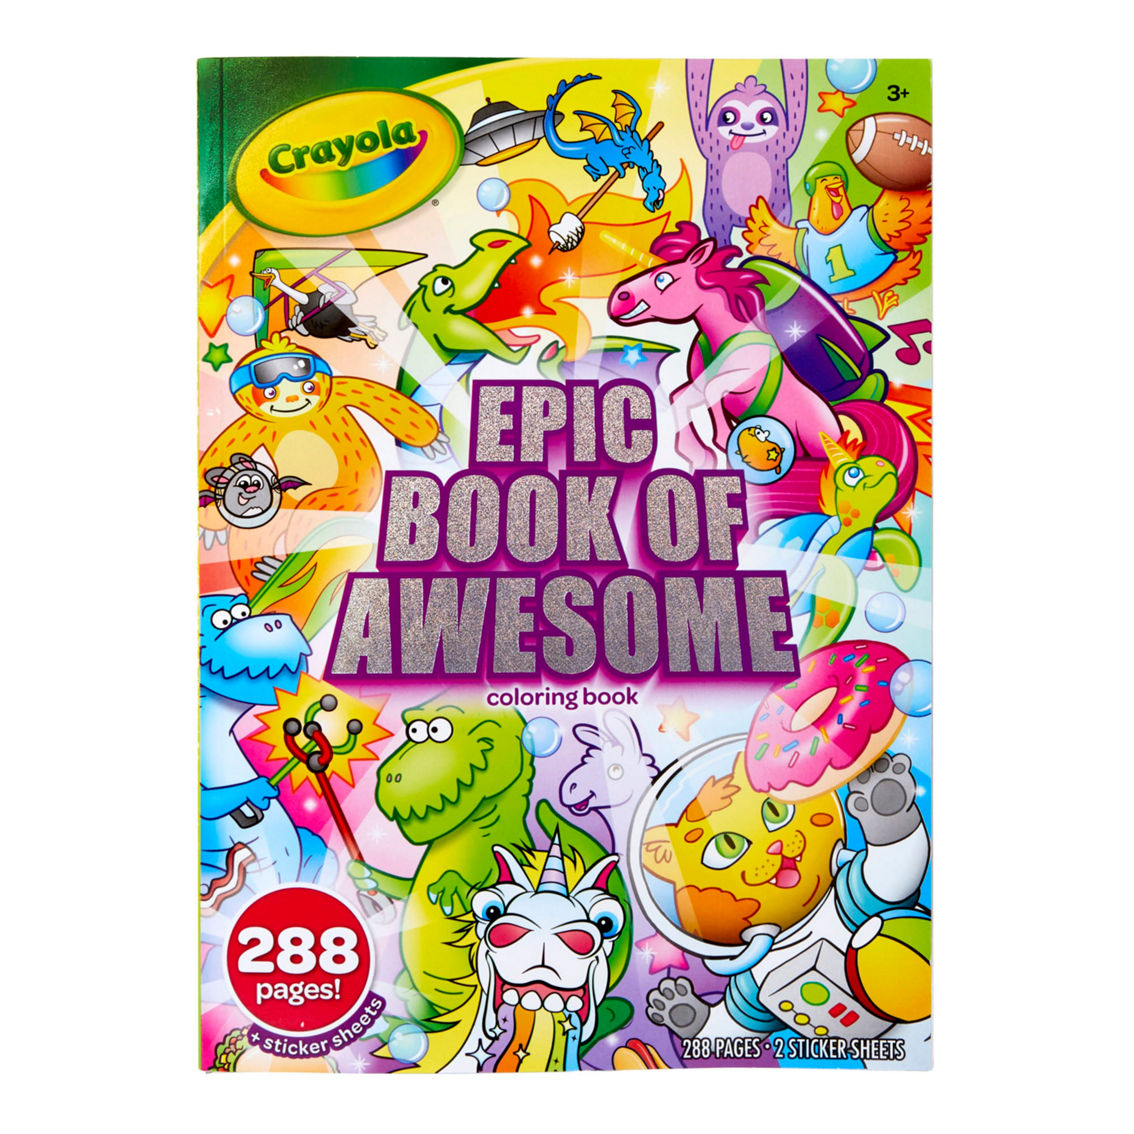 Crayola® Epic Book of Awesome 288-Page Coloring Book, Pack of 6 - Image 2 of 3